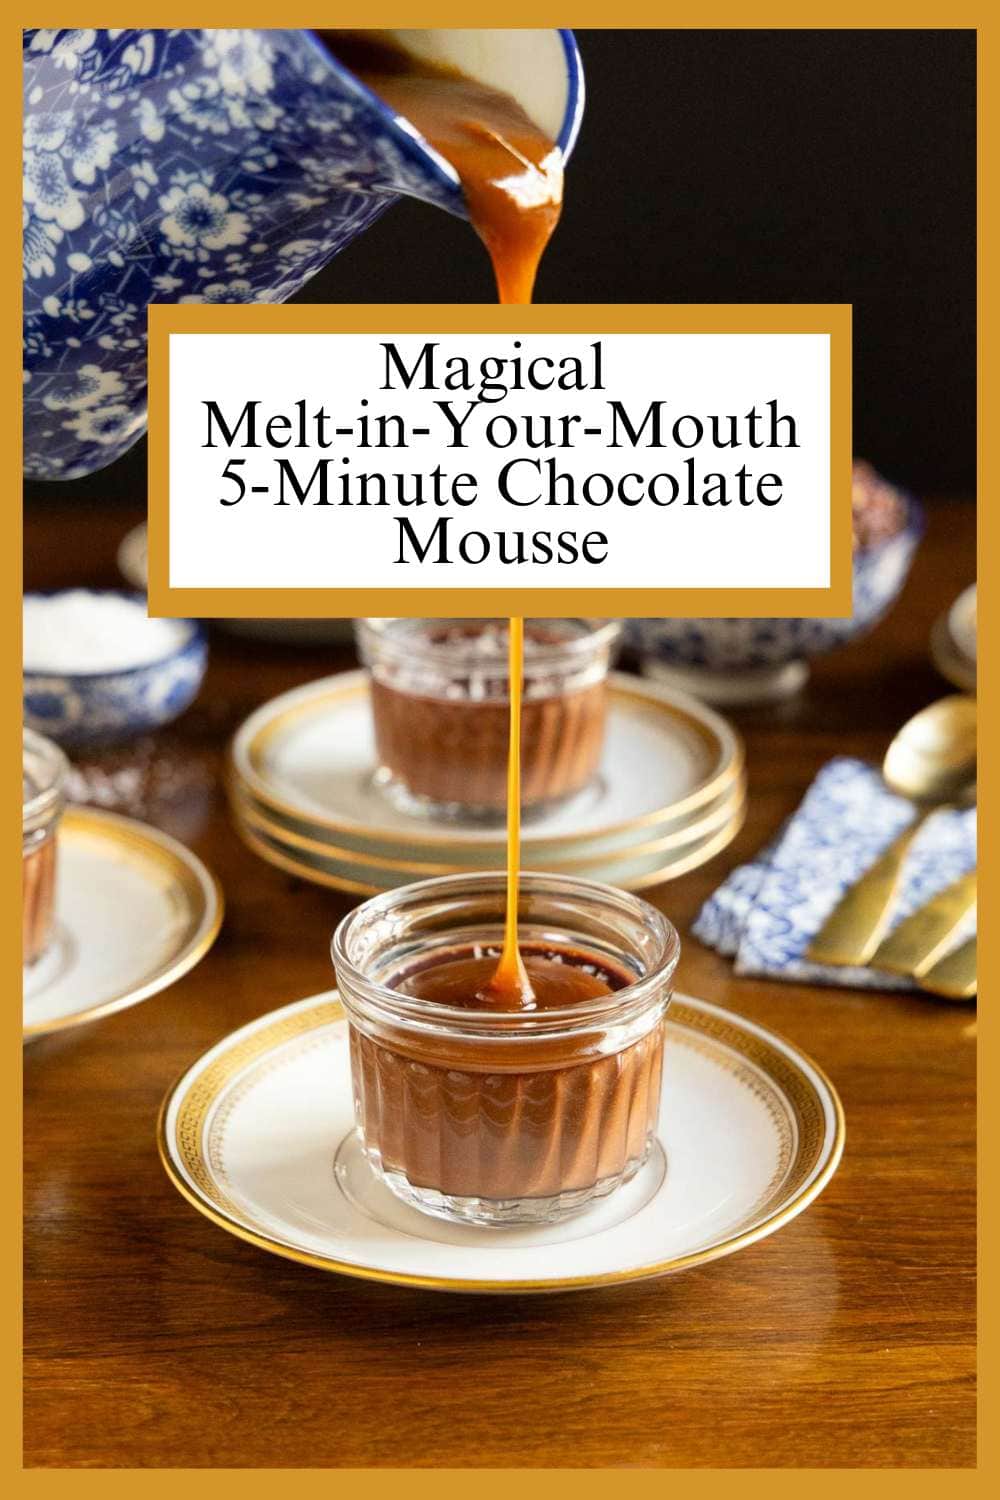 Magical, Melt-in-Your-Mouth 5-Minute Chocolate Mousse (Ridiculously Easy!)